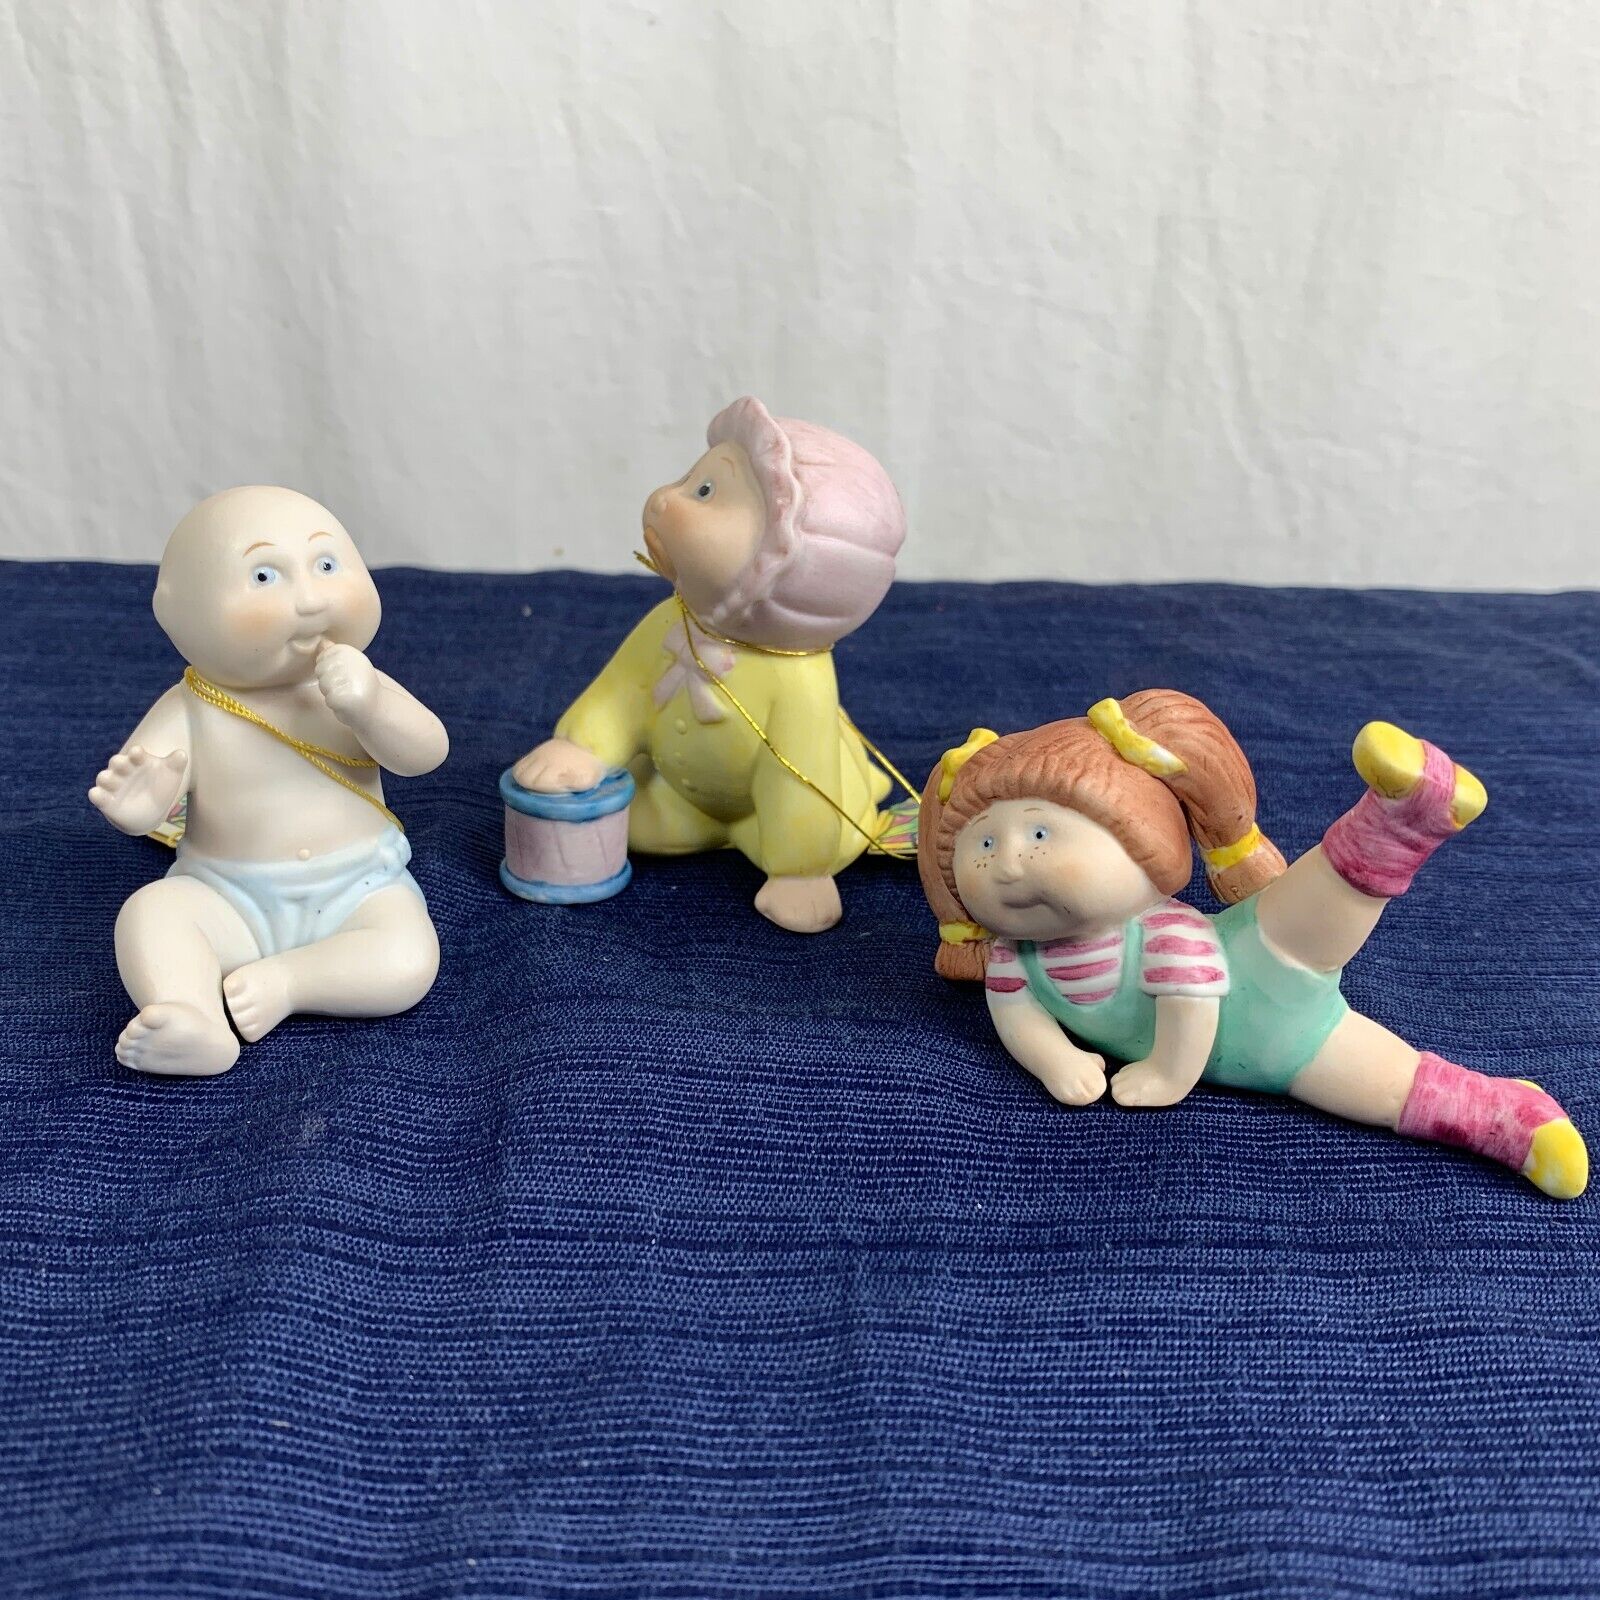 1984-85 CABBAGE PATCH KIDS Xavier Roberts Baby Figurines Lot of 3